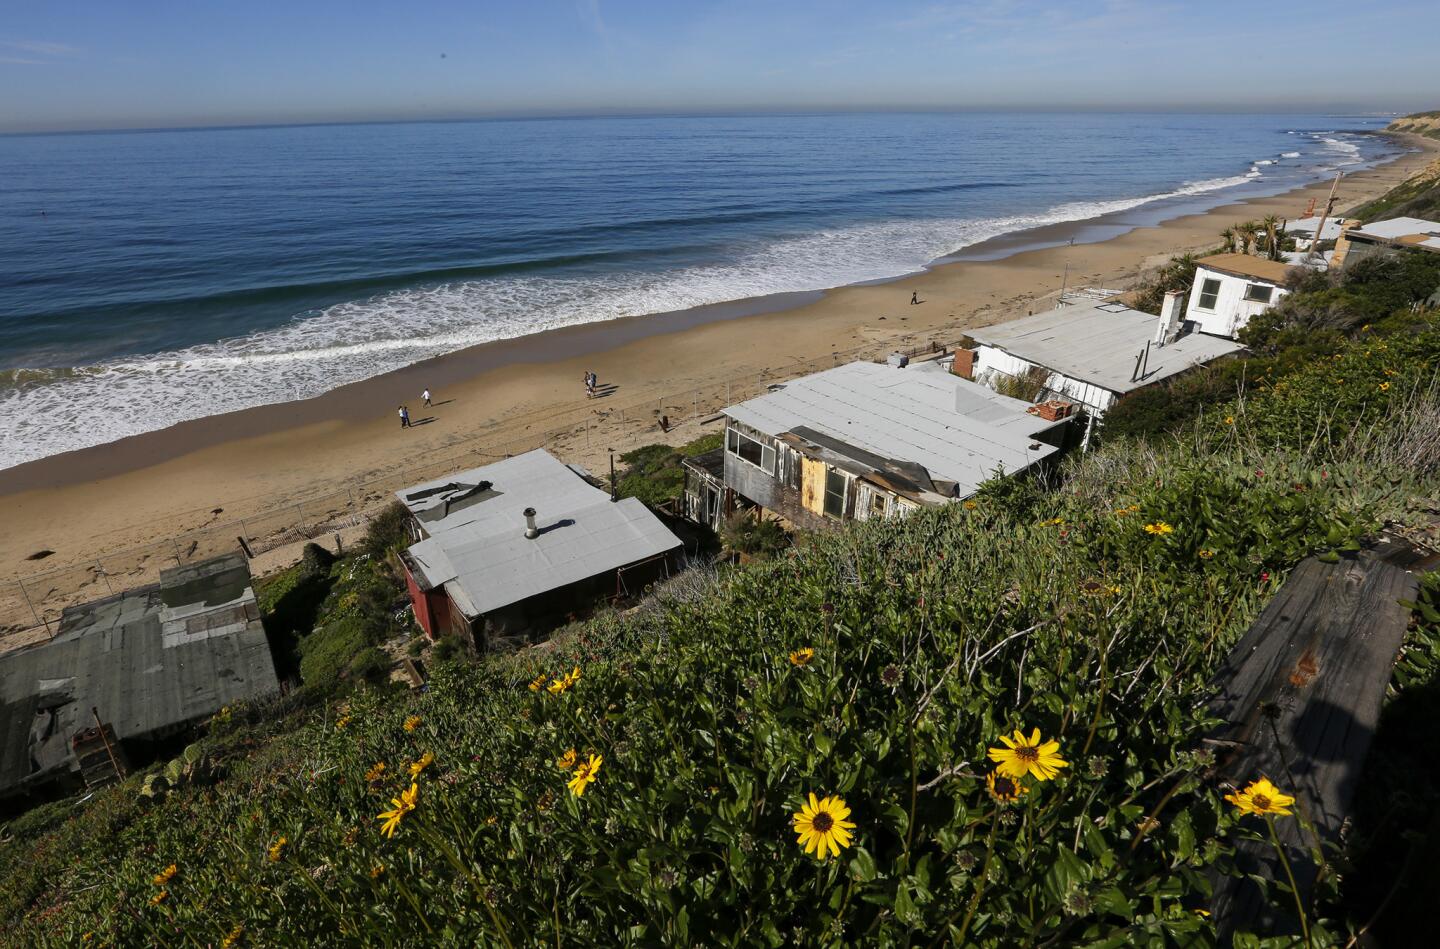 The Coastal Commission voted Wednesday to approve a plan to refurbish the last 17 cottages yet to be renovated in Crystal Cove State Park.